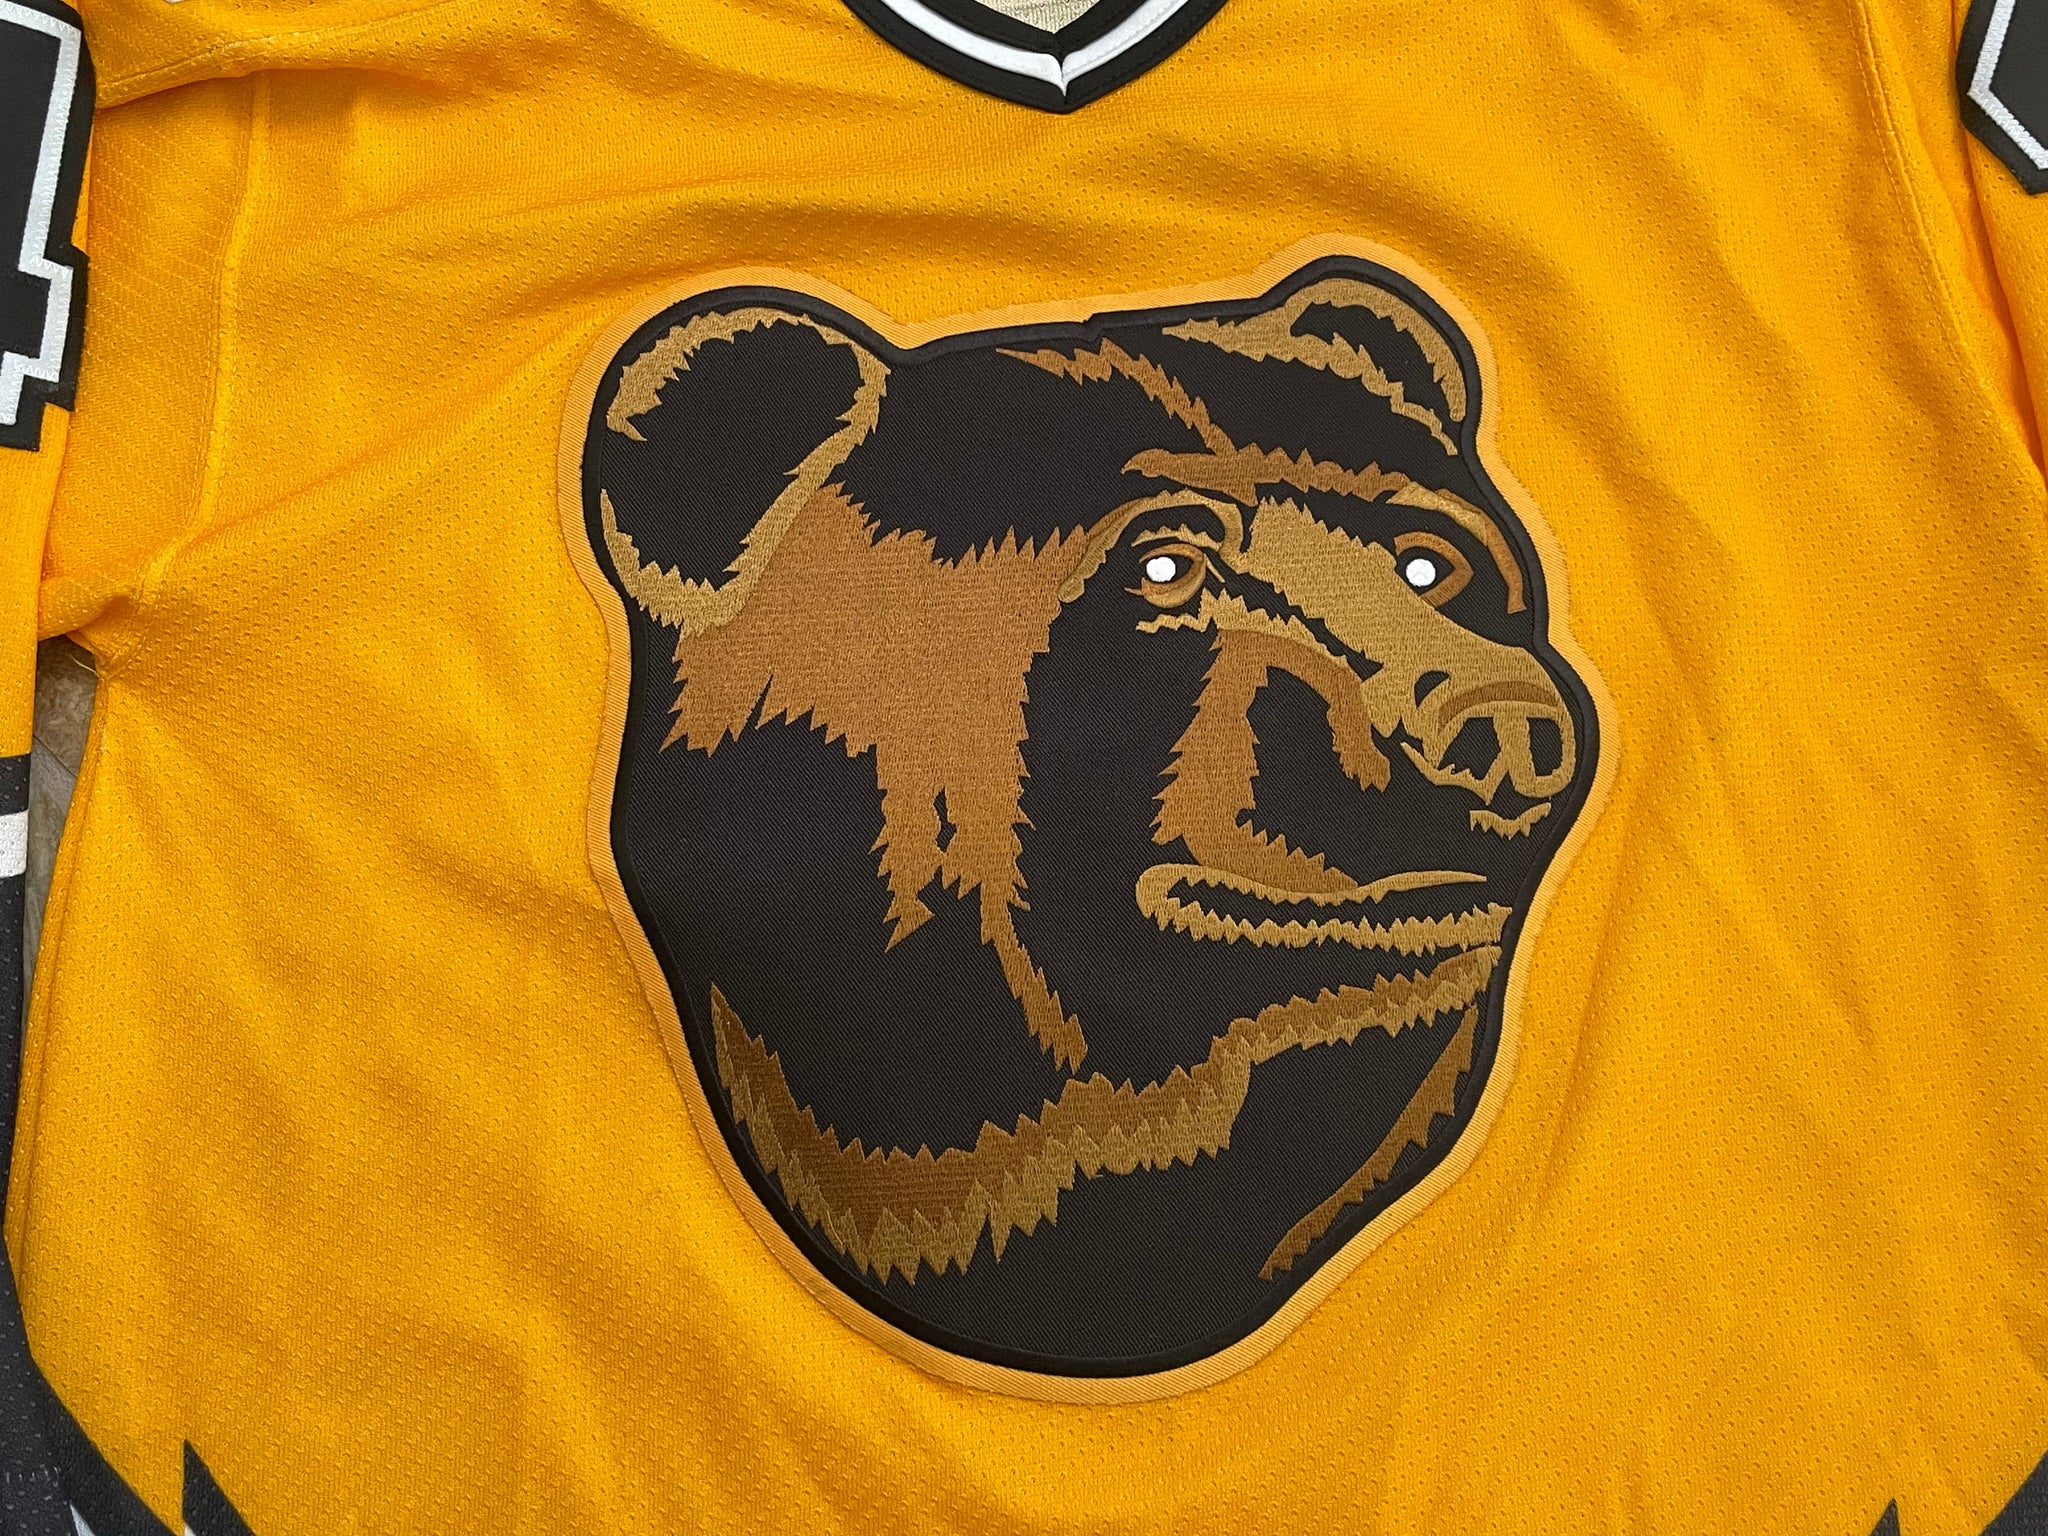 Boston Bruins - The debut of Pooh.